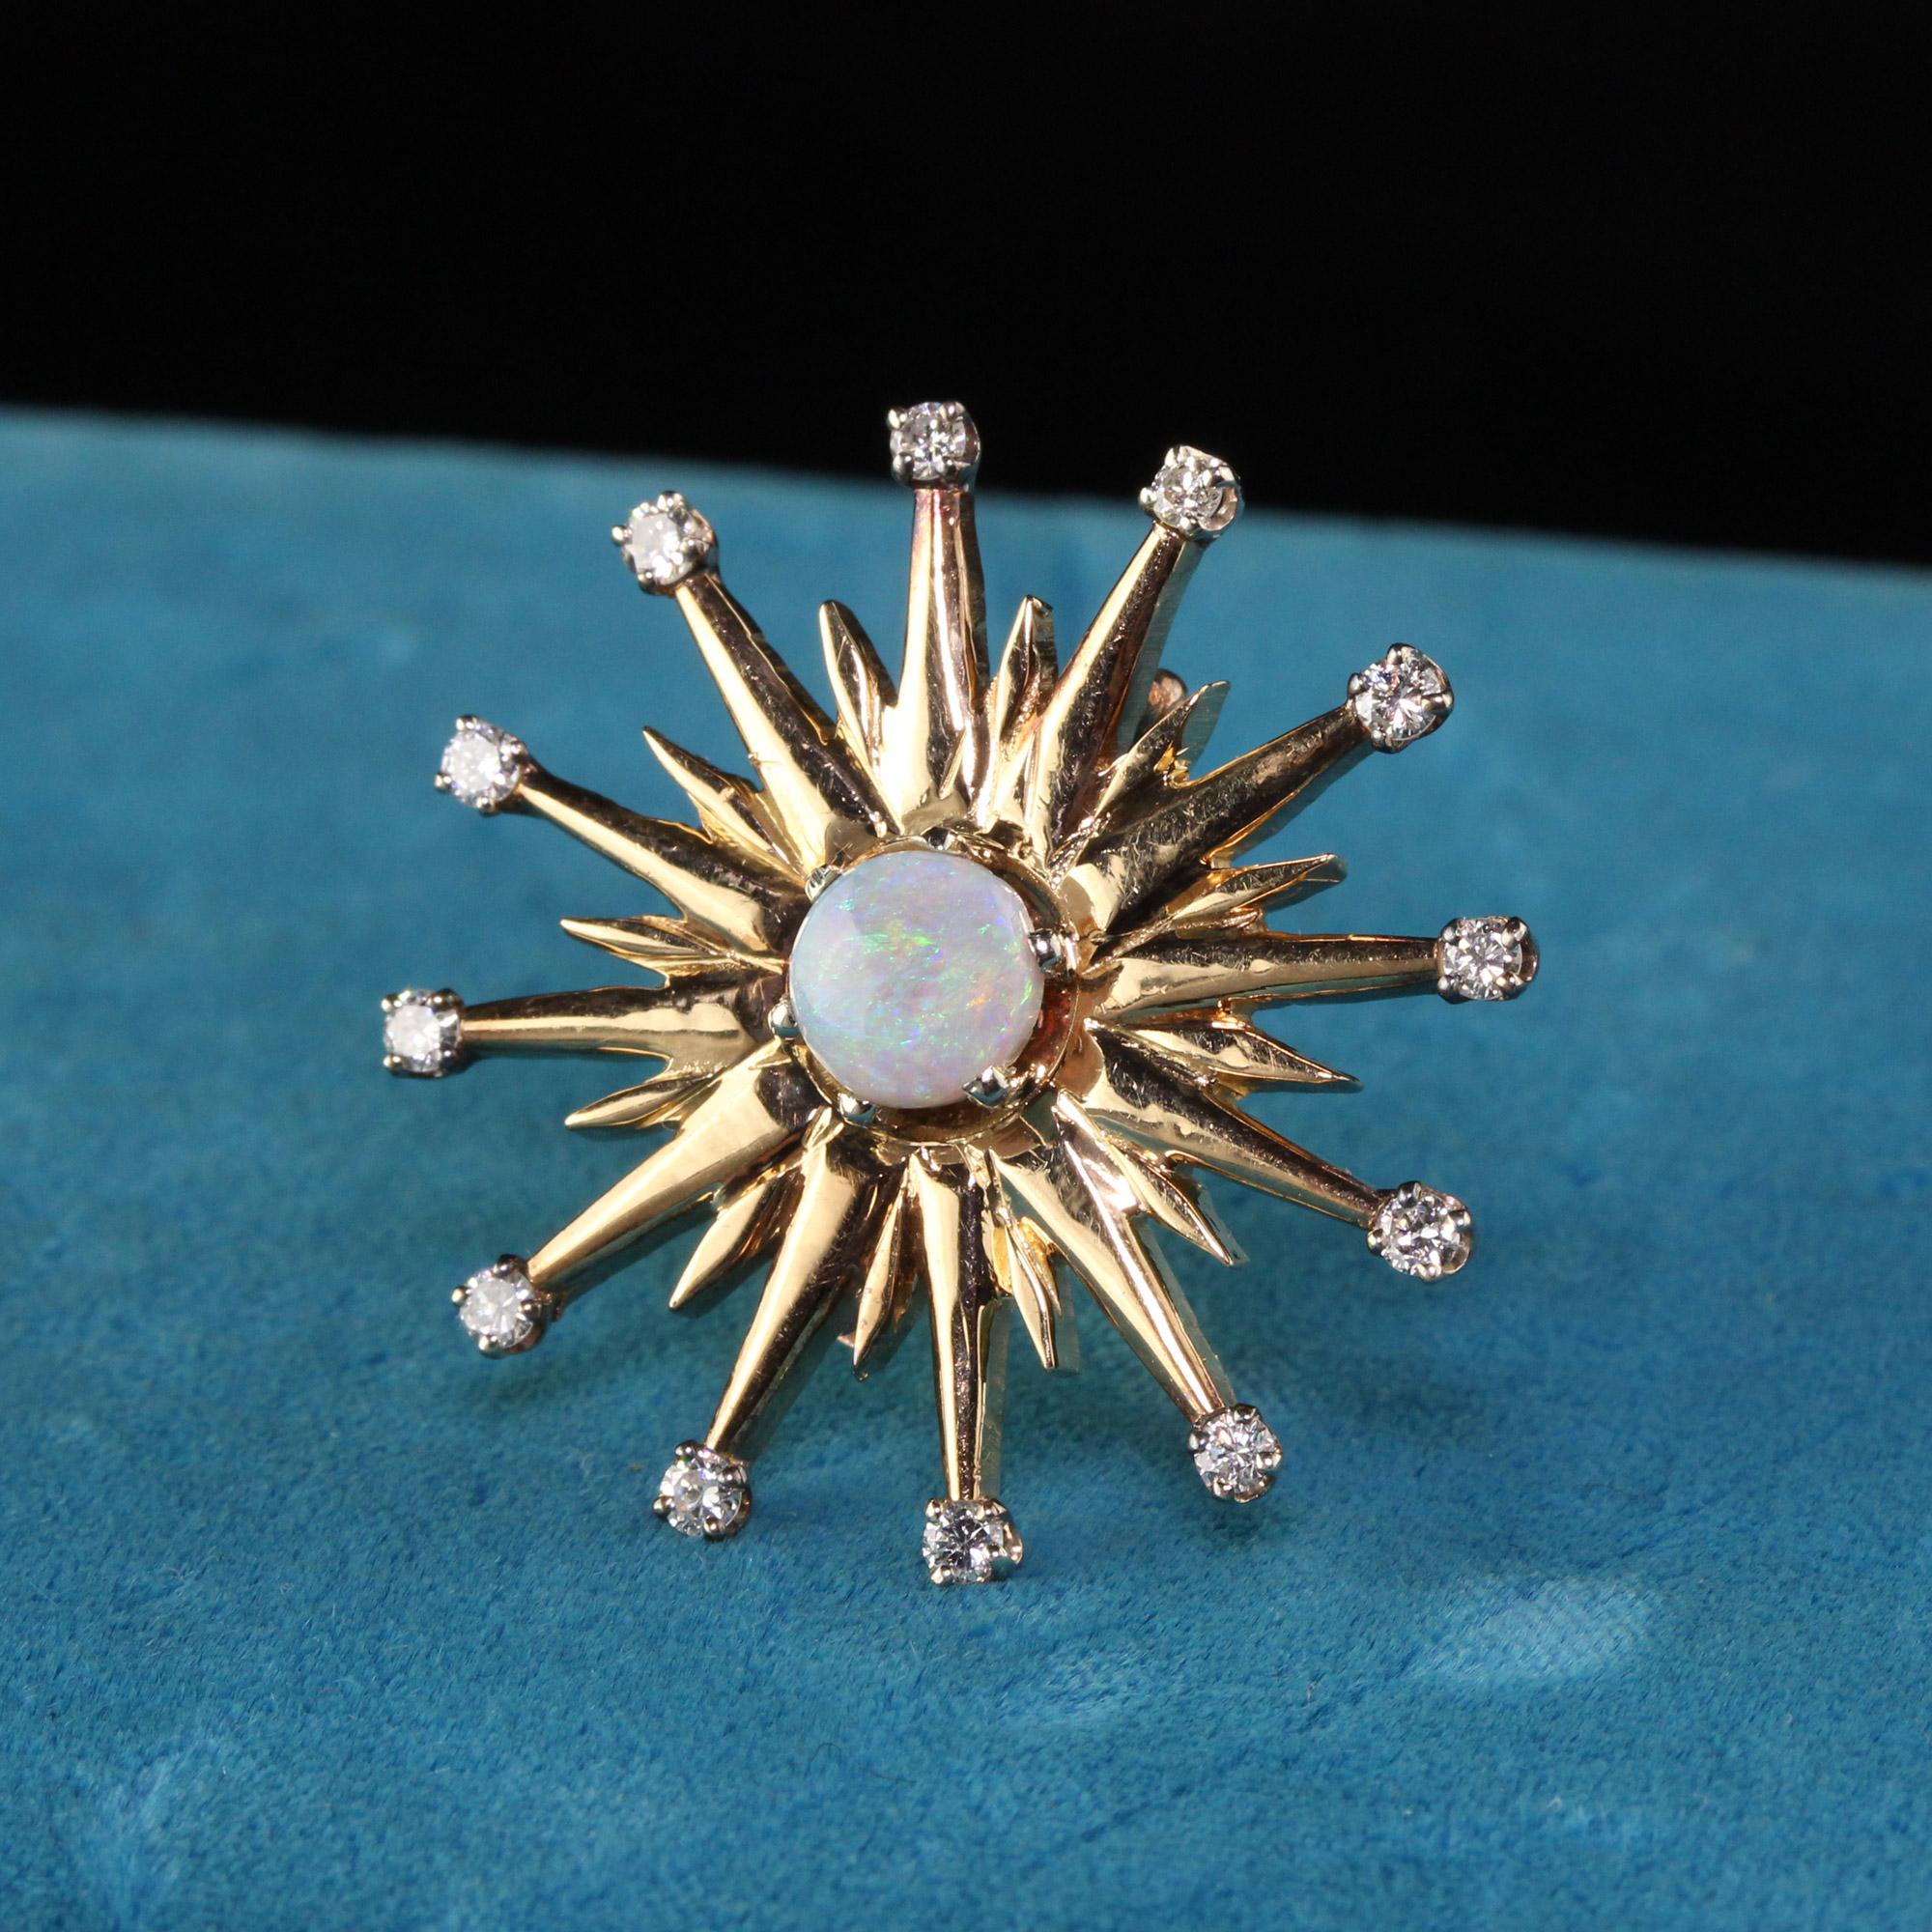 Gorgeous Vintage 18K Yellow Gold Black Opal and Diamond Star Burst Pin Pendant. This gorgeous Black Opal piece can be worn as either a pin or a pendant. It features 12 smaller diamonds and a beautiful round black opal in the center. Very very